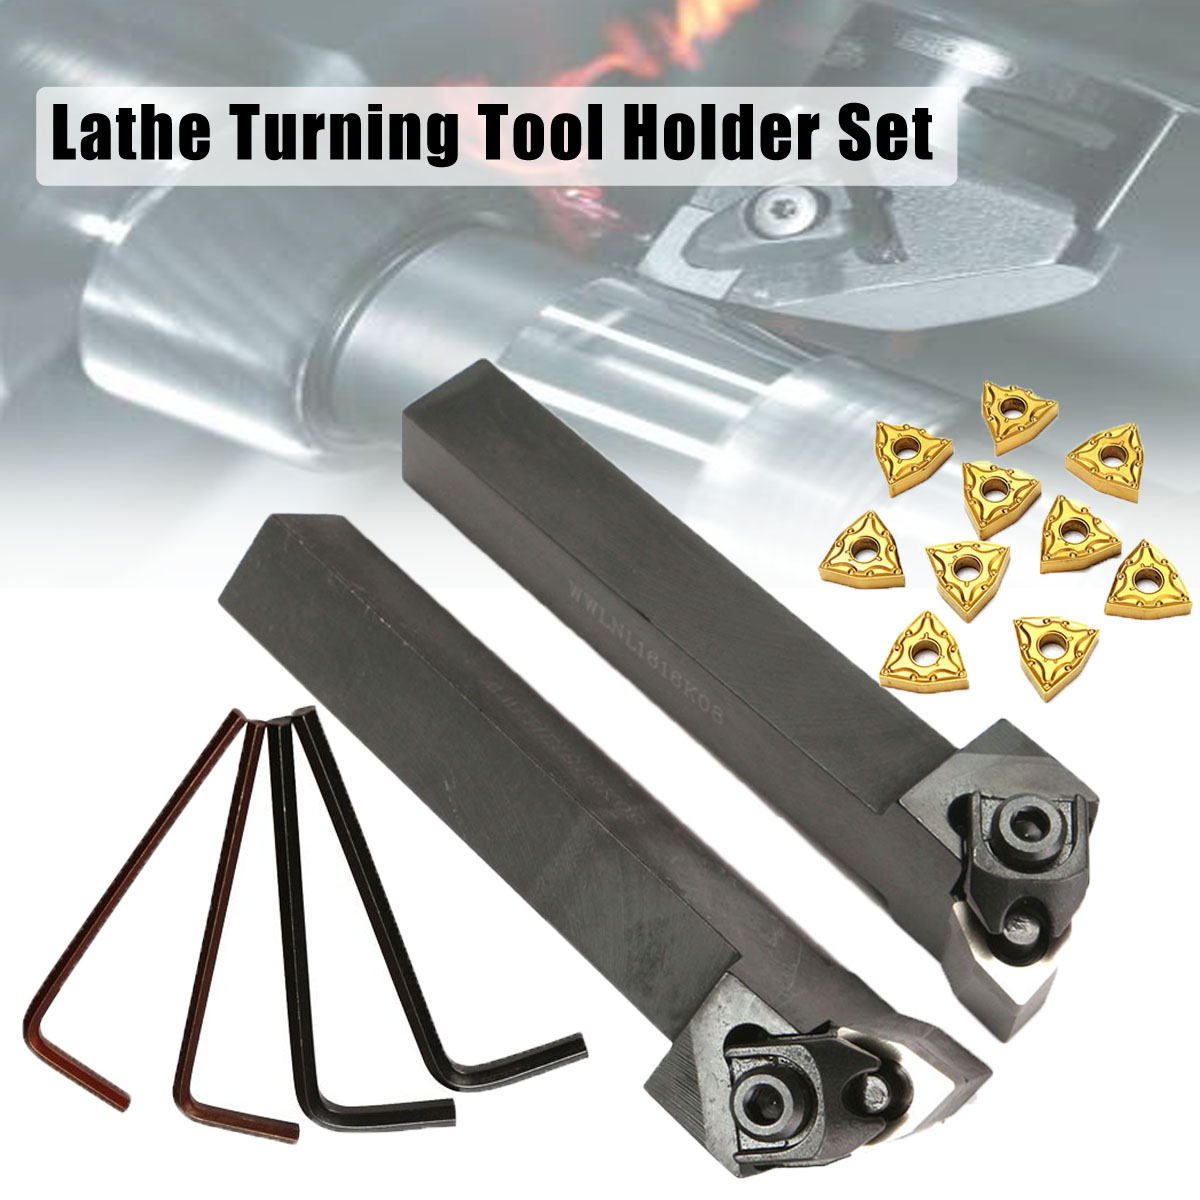 WWLNR/L1616H/K08 16x100mm Lathe Turning Tool Holder With 10pcs WNMG080404 Inserts 15